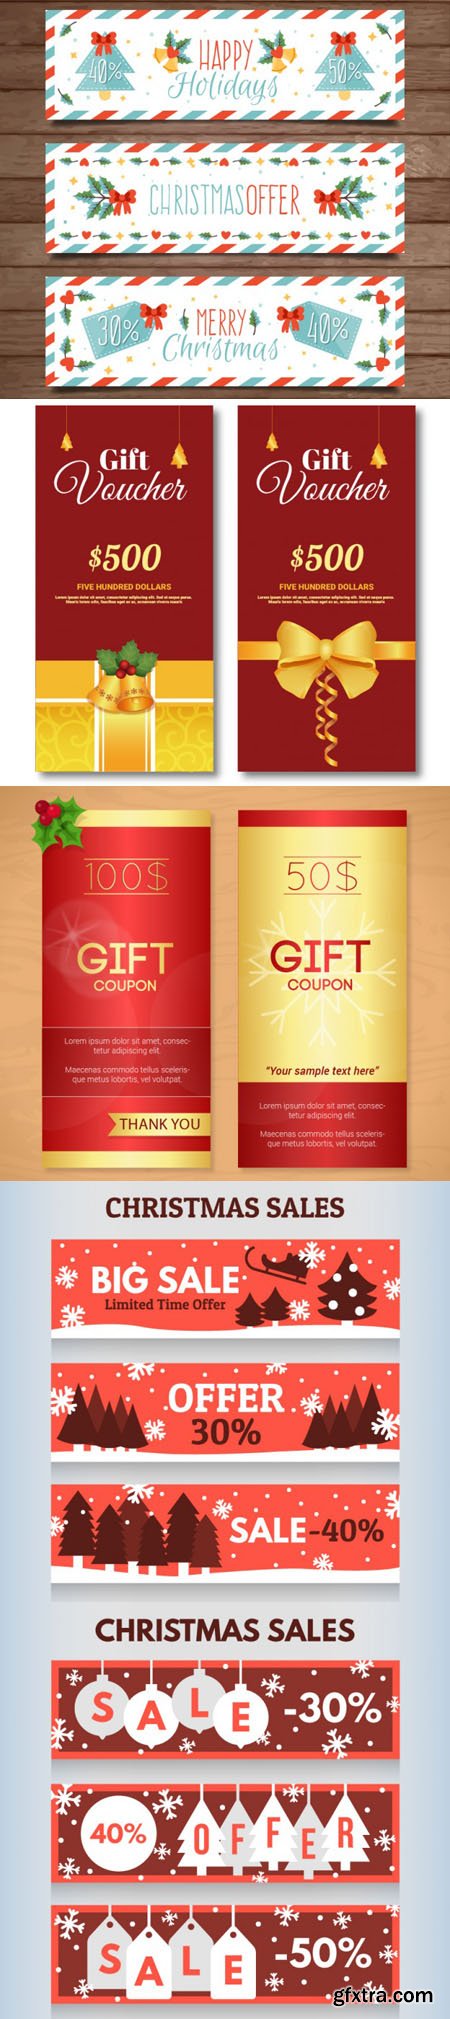 Holiday Sales & Gifts Banners in Vector